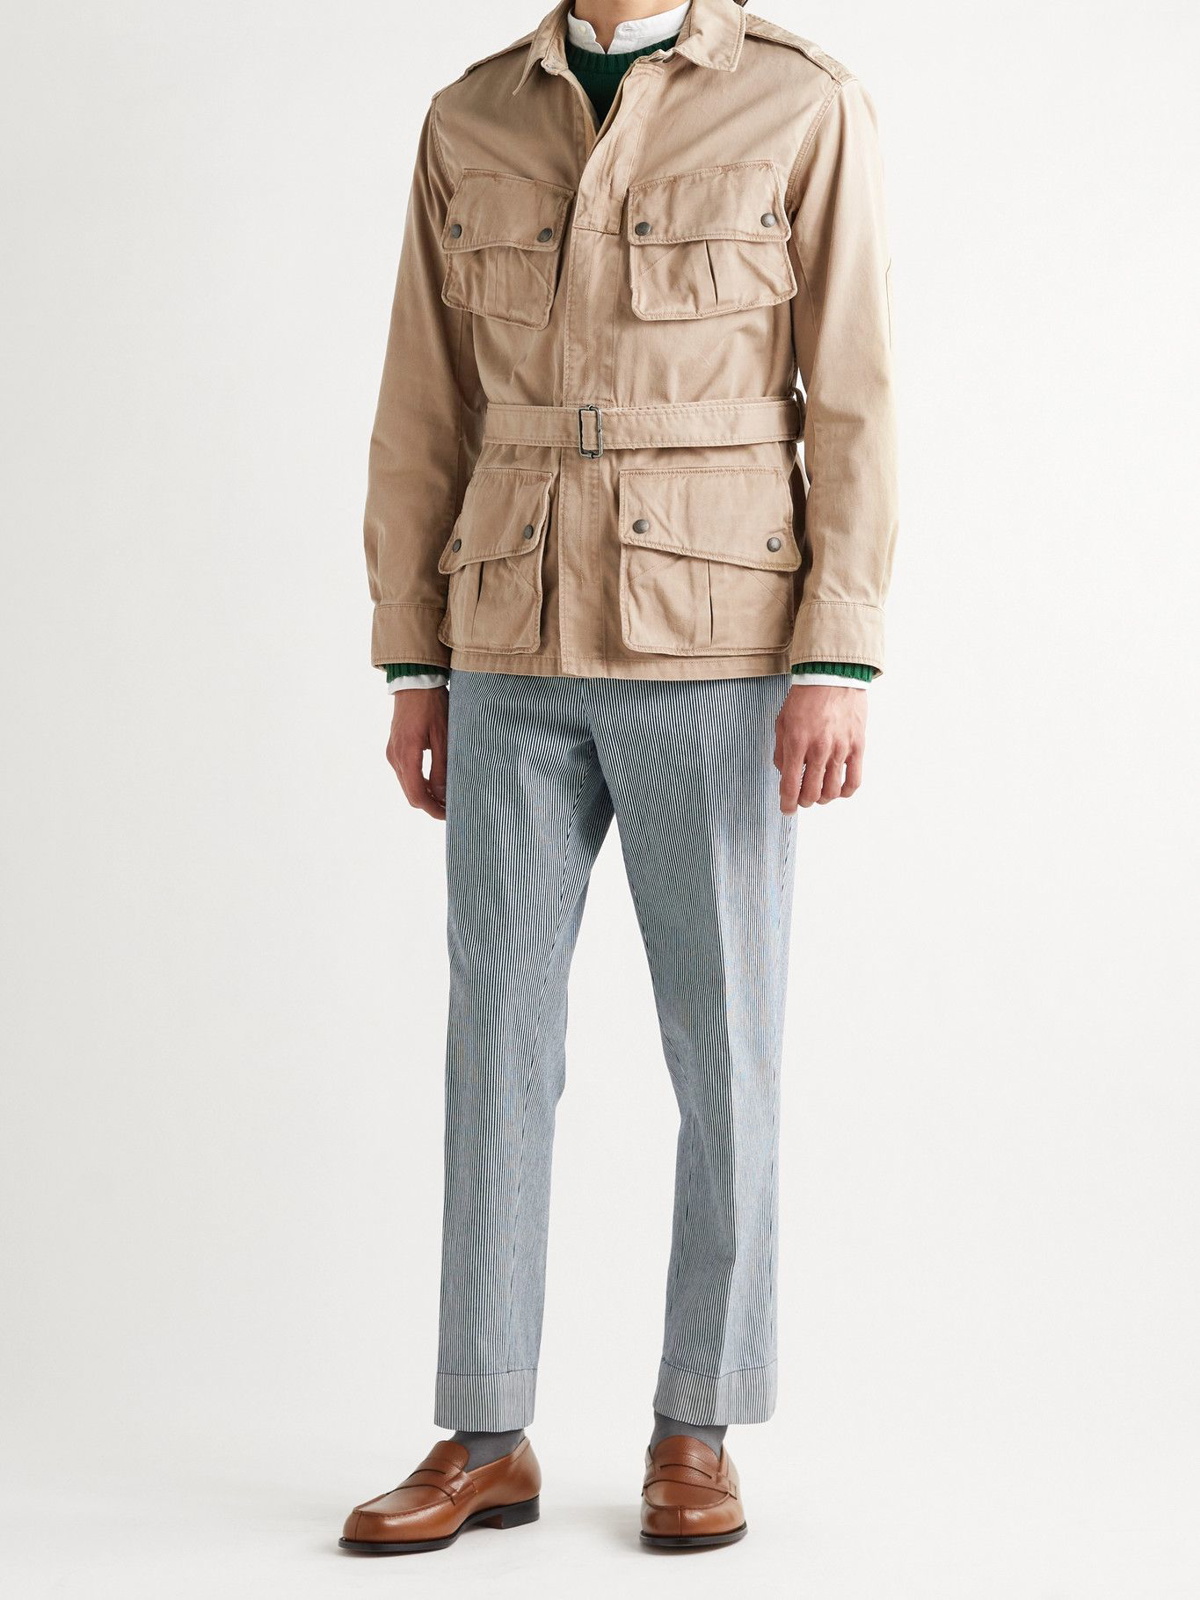 Polo Ralph Lauren Cotton Twill Jacket in Natural for Men